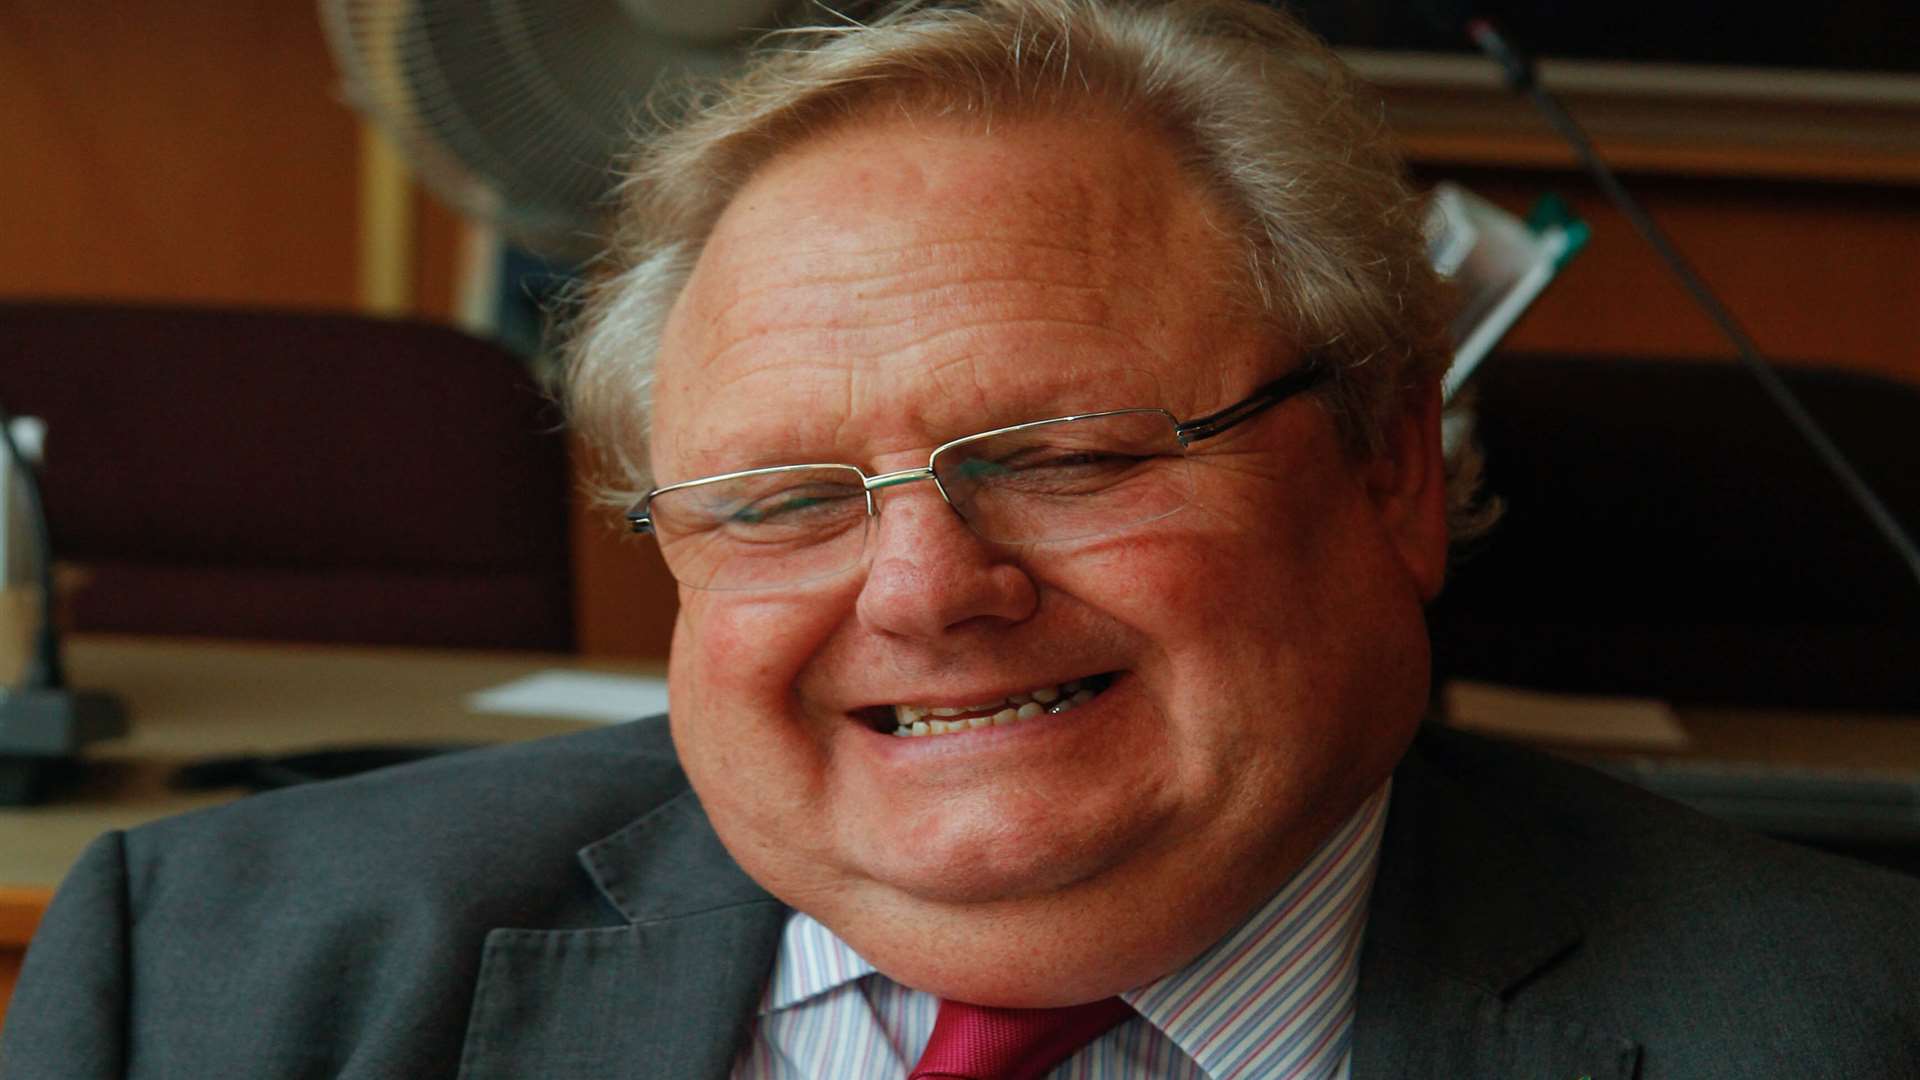 Swale council leader Cllr Andrew Bowles praised the varied positions available